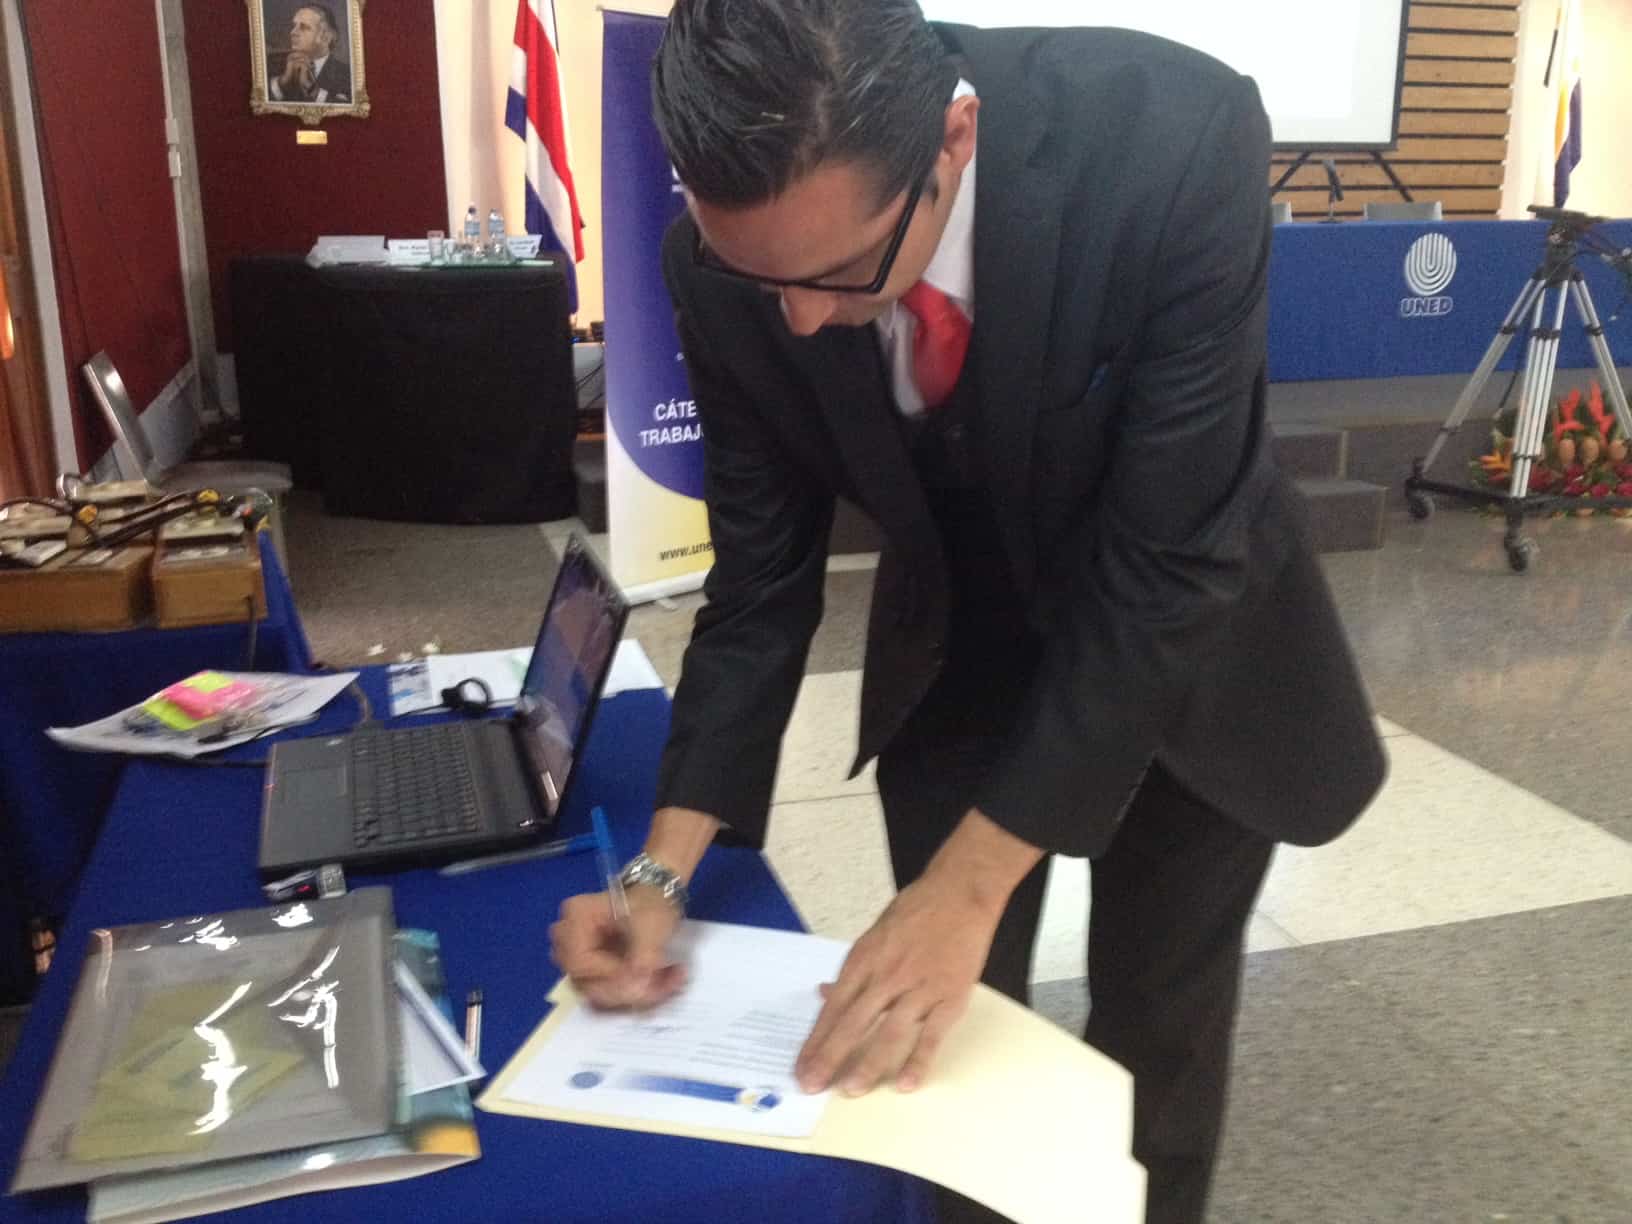 Dr. Alan Rímola of the Minsitry of Public Health signs an agreement that will allow the Ministry to more closely monitor autism cases in Costa Rica, April 21, 2015.